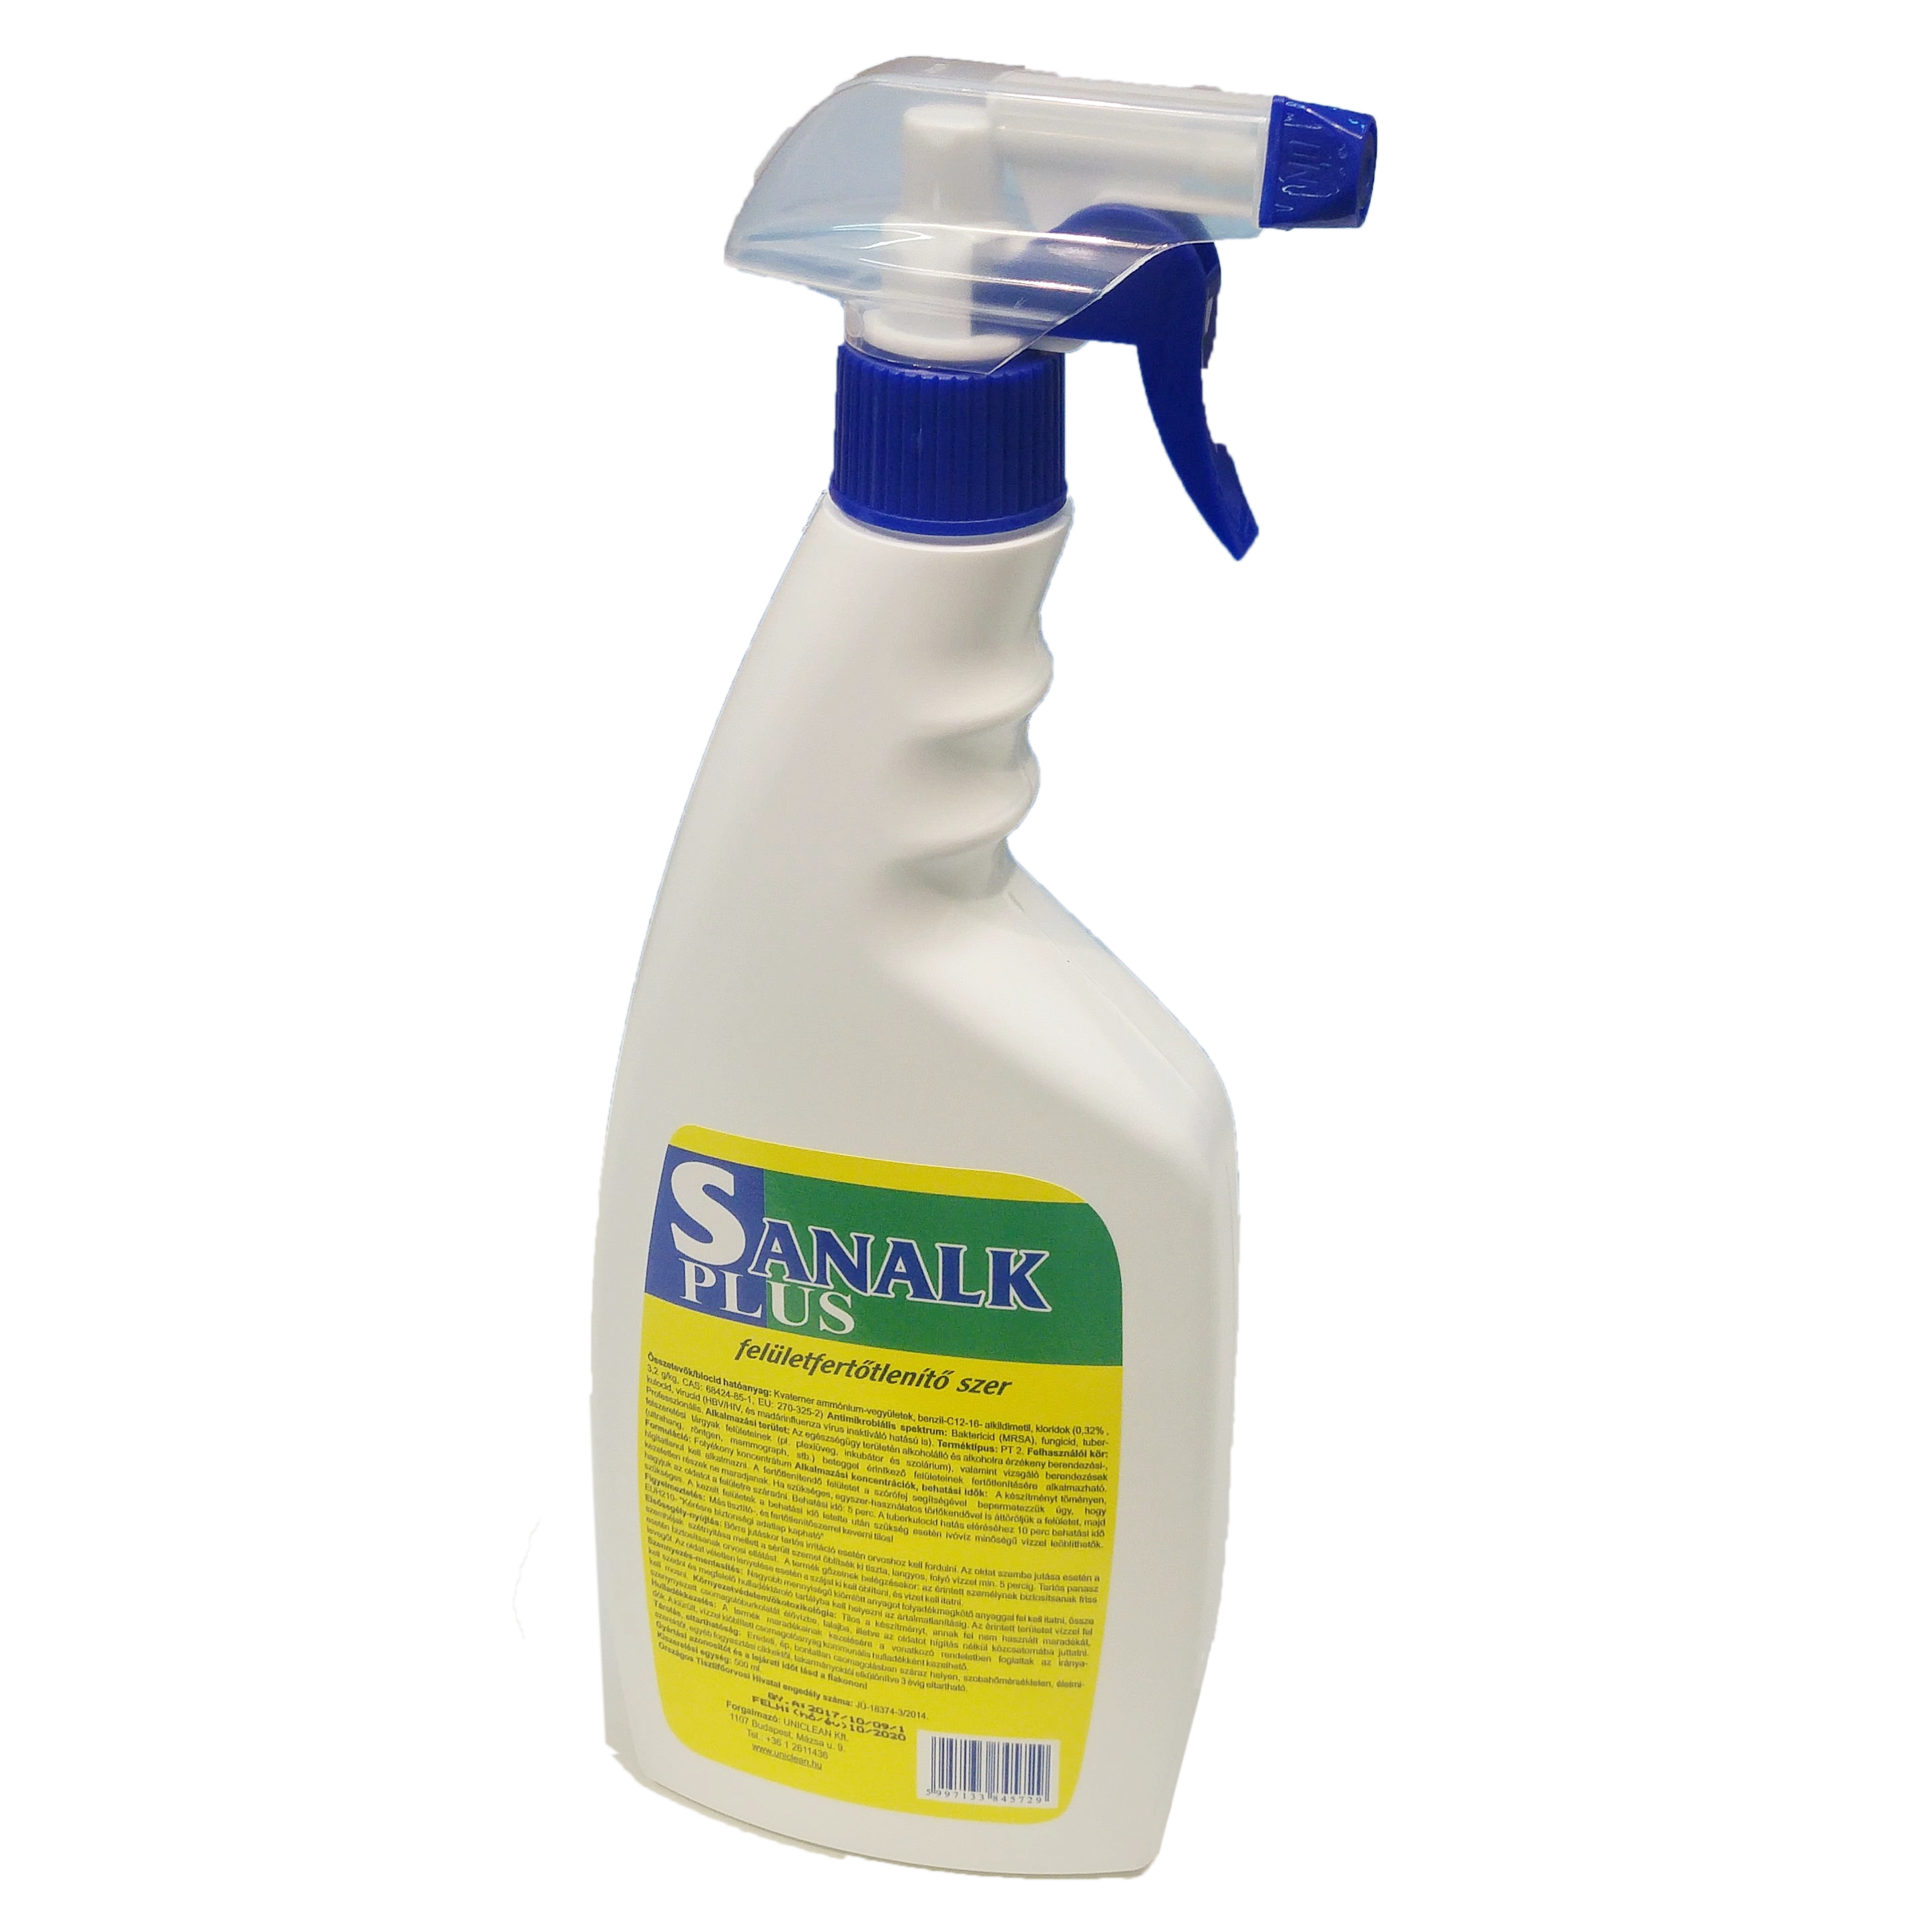 Sanalk Plus Sterilization Spray for surface, 500ml - (available only in Hungary)